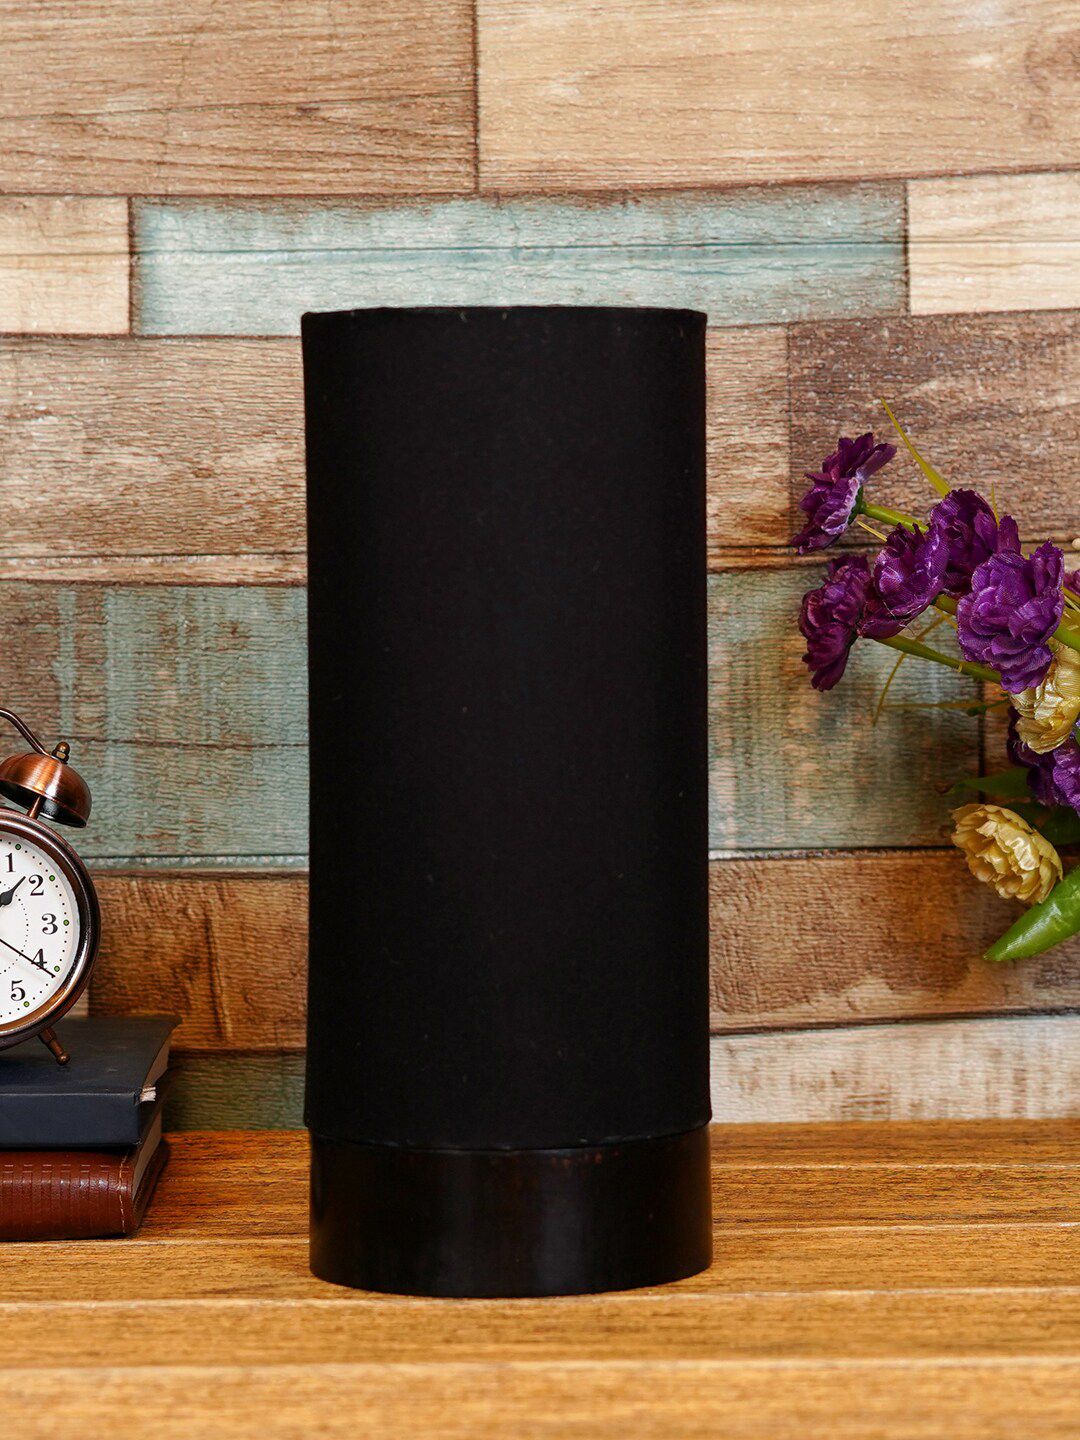 foziq Brown & Black Textured Wooden Table Lamp Price in India